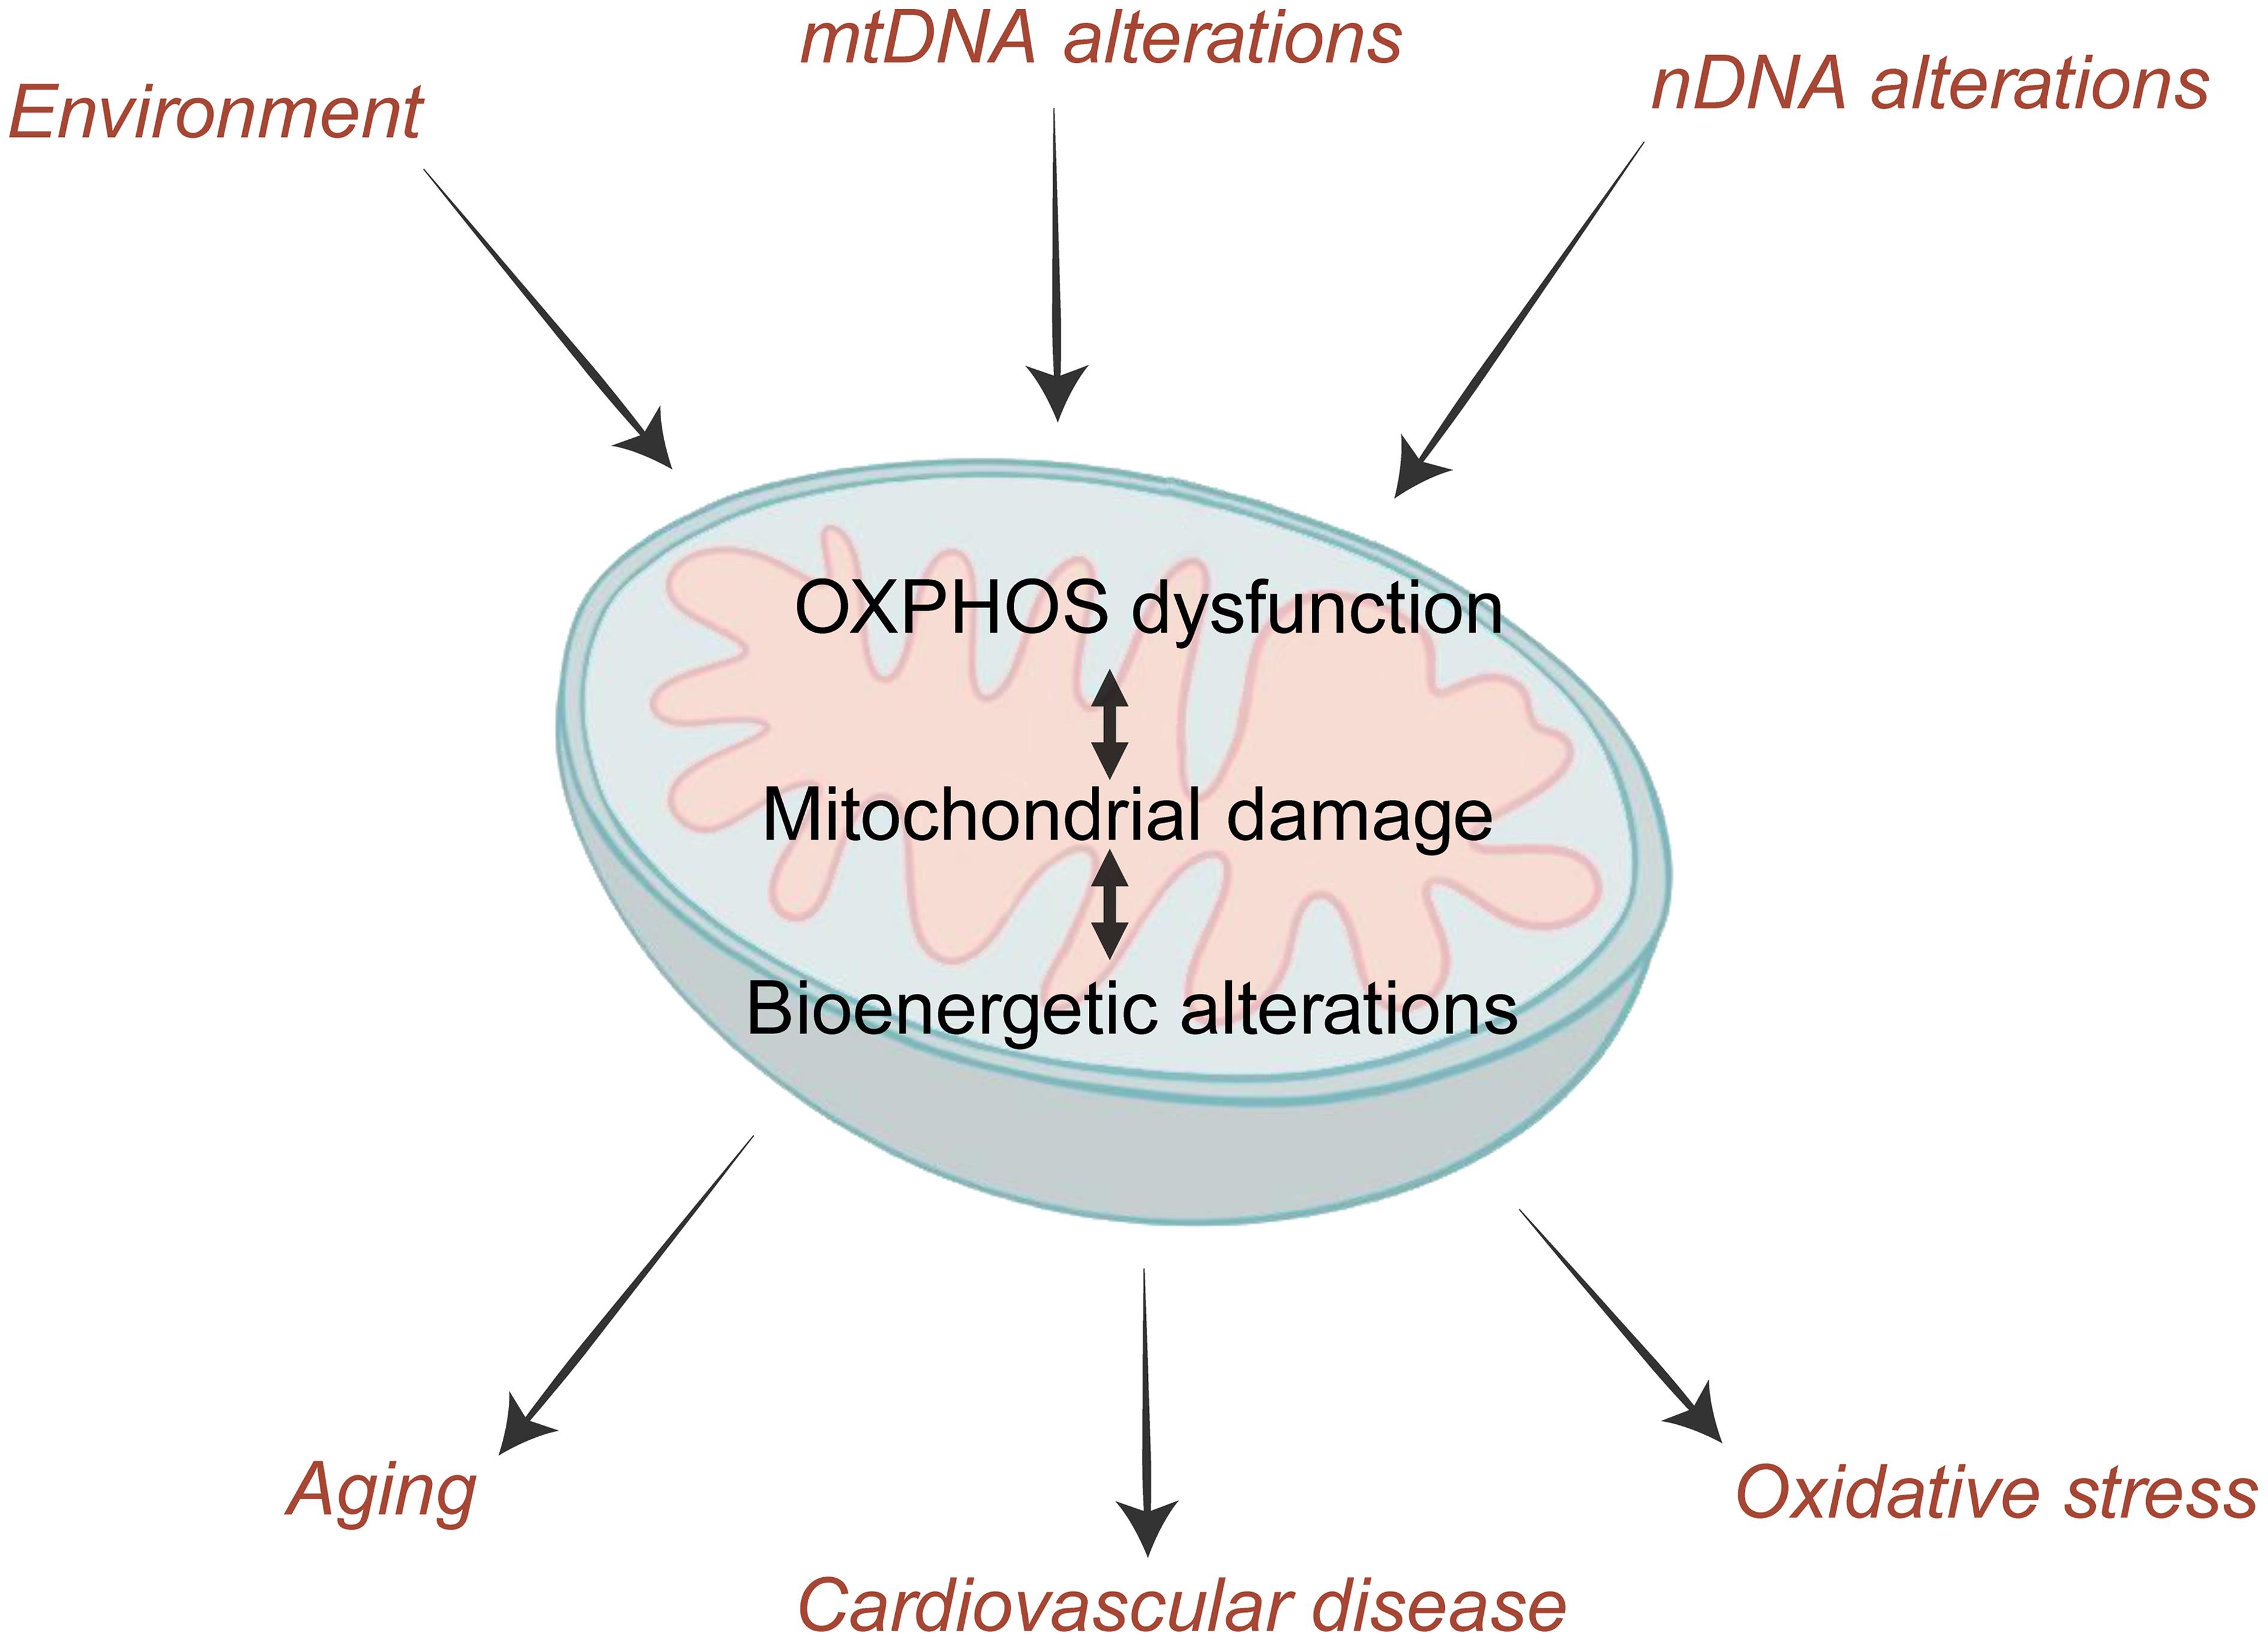 The scheme of mtDNA mutations and other factors affecting mitochondrial functioning, leads to cardiovascular disease and other detrimental consequences.